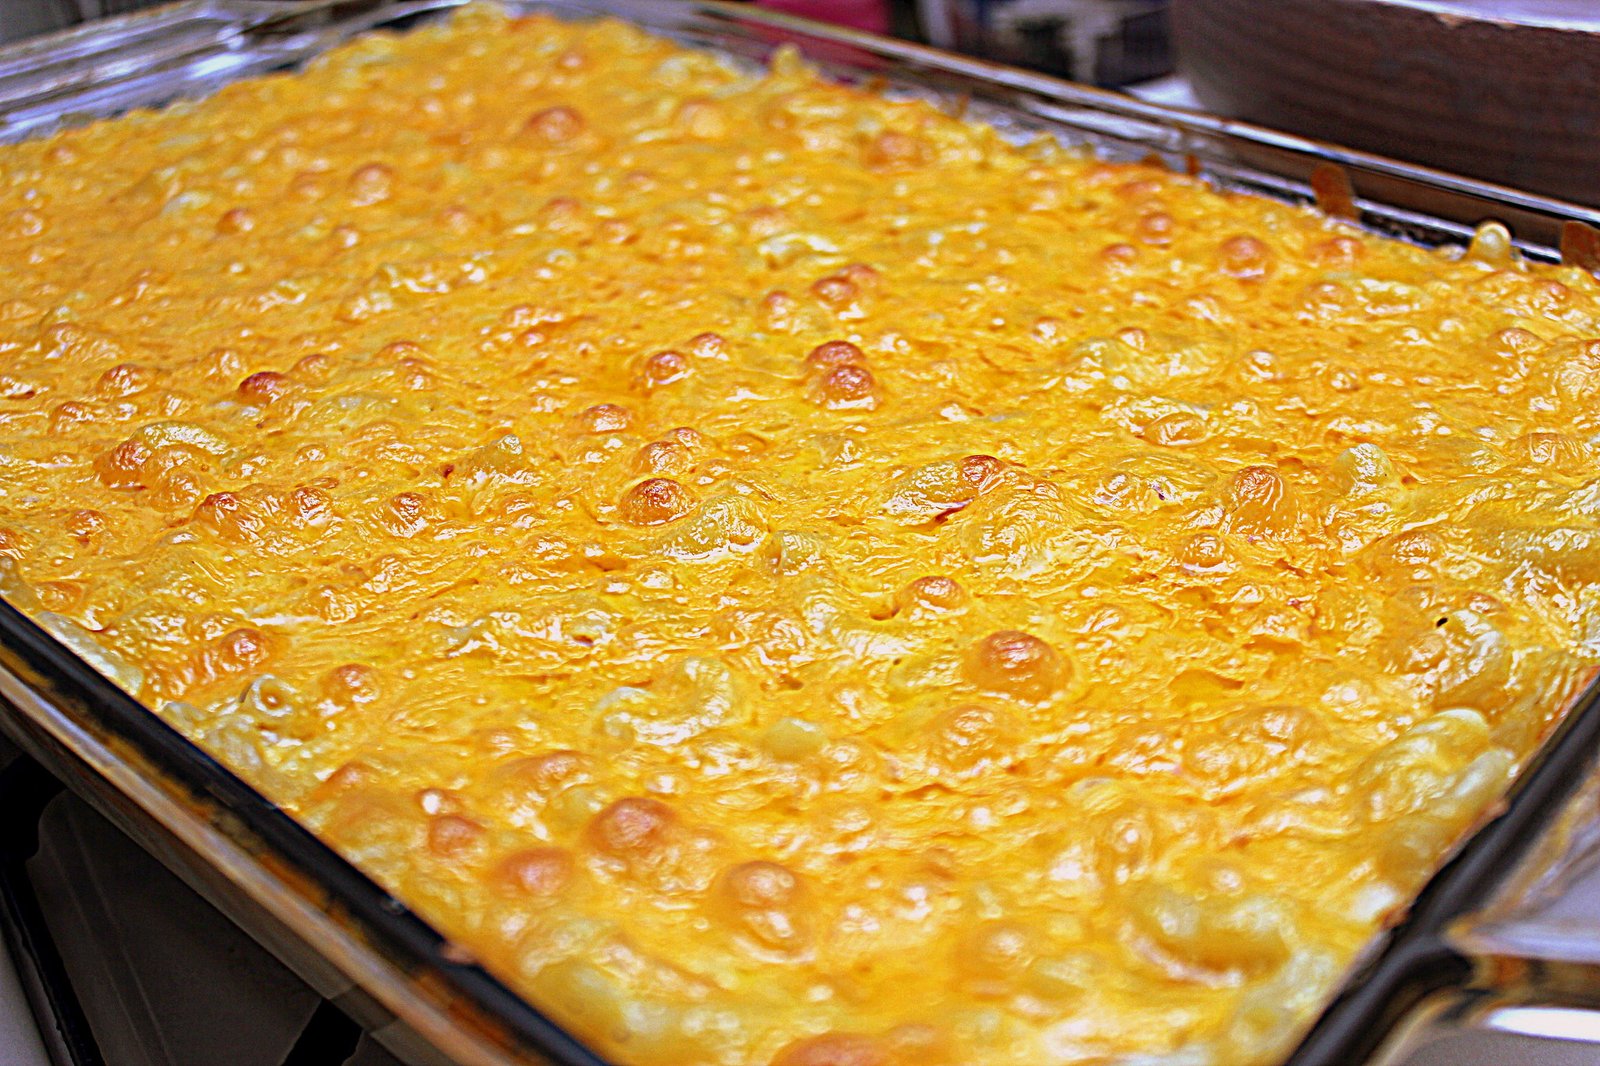 Muellers mac and cheese recipe